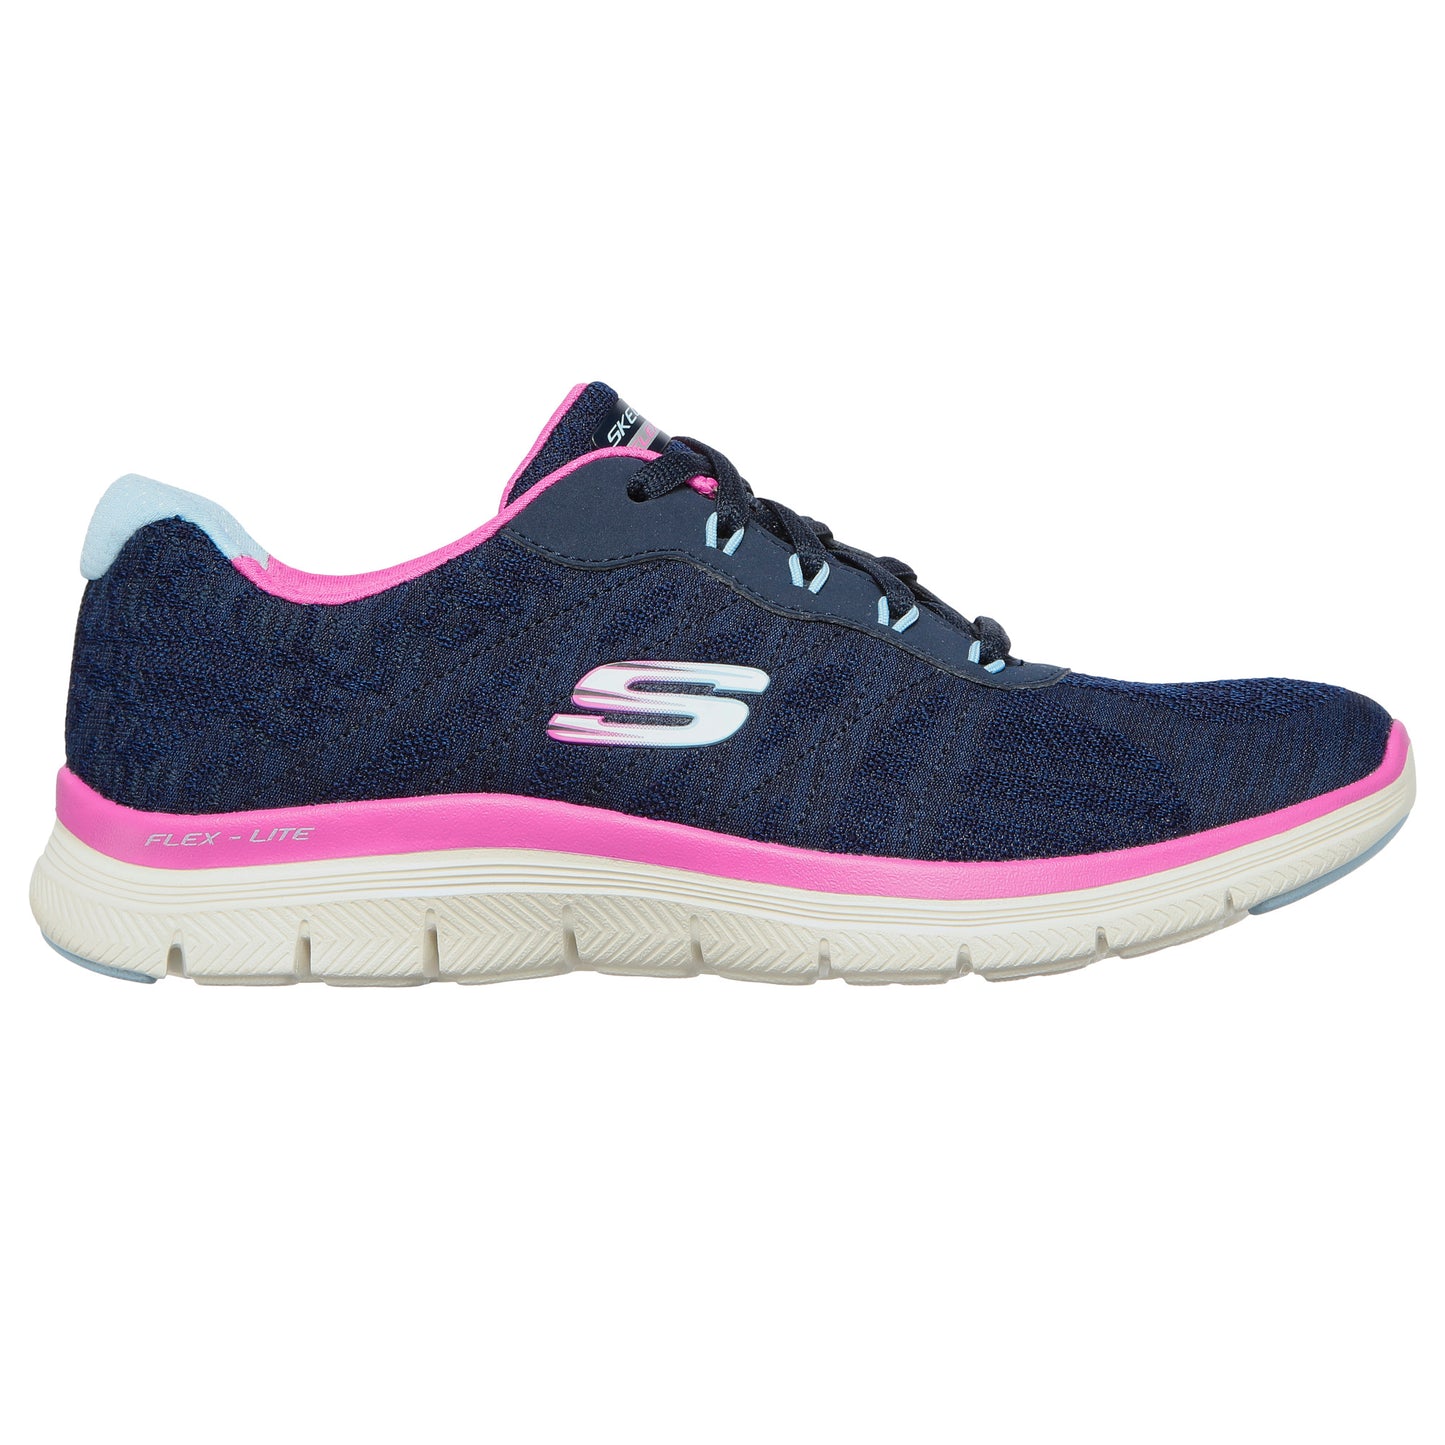 Skechers 149570 Flex Appeal 4.0-Fresh Move Navy Trainers